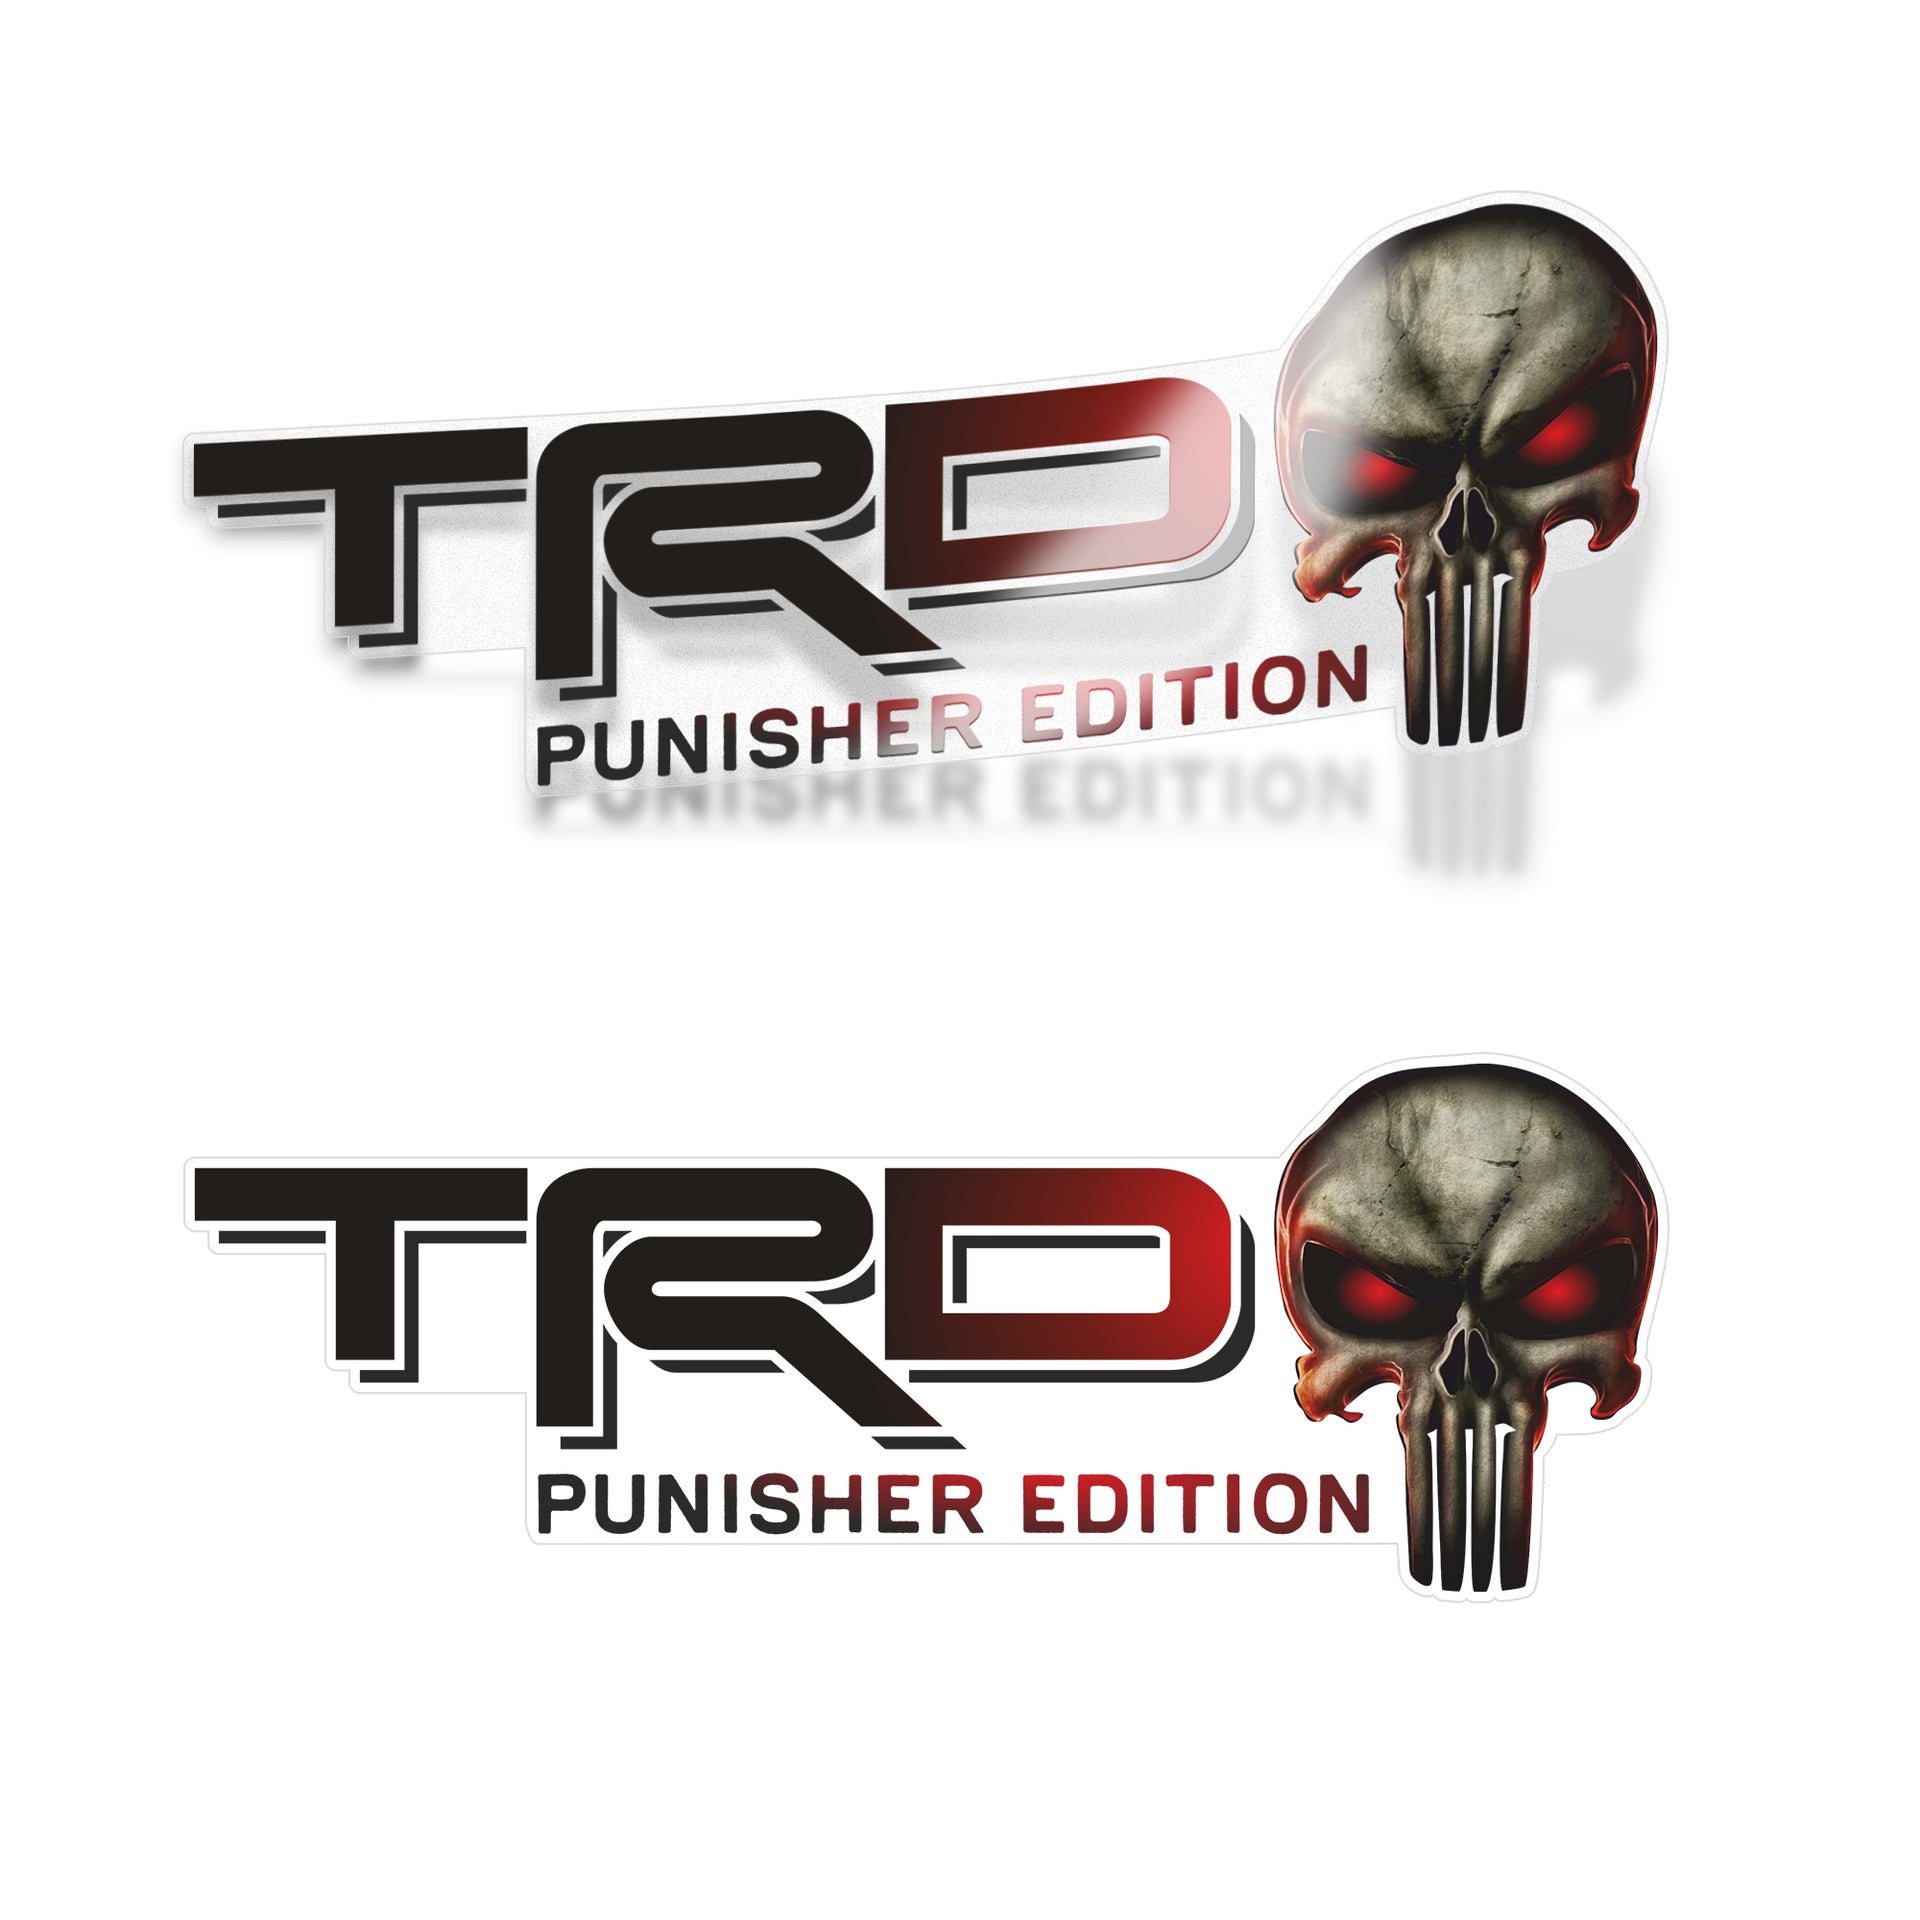 Trd Off Road Skull decals for Truck, Clear Background Series, Matte Finish